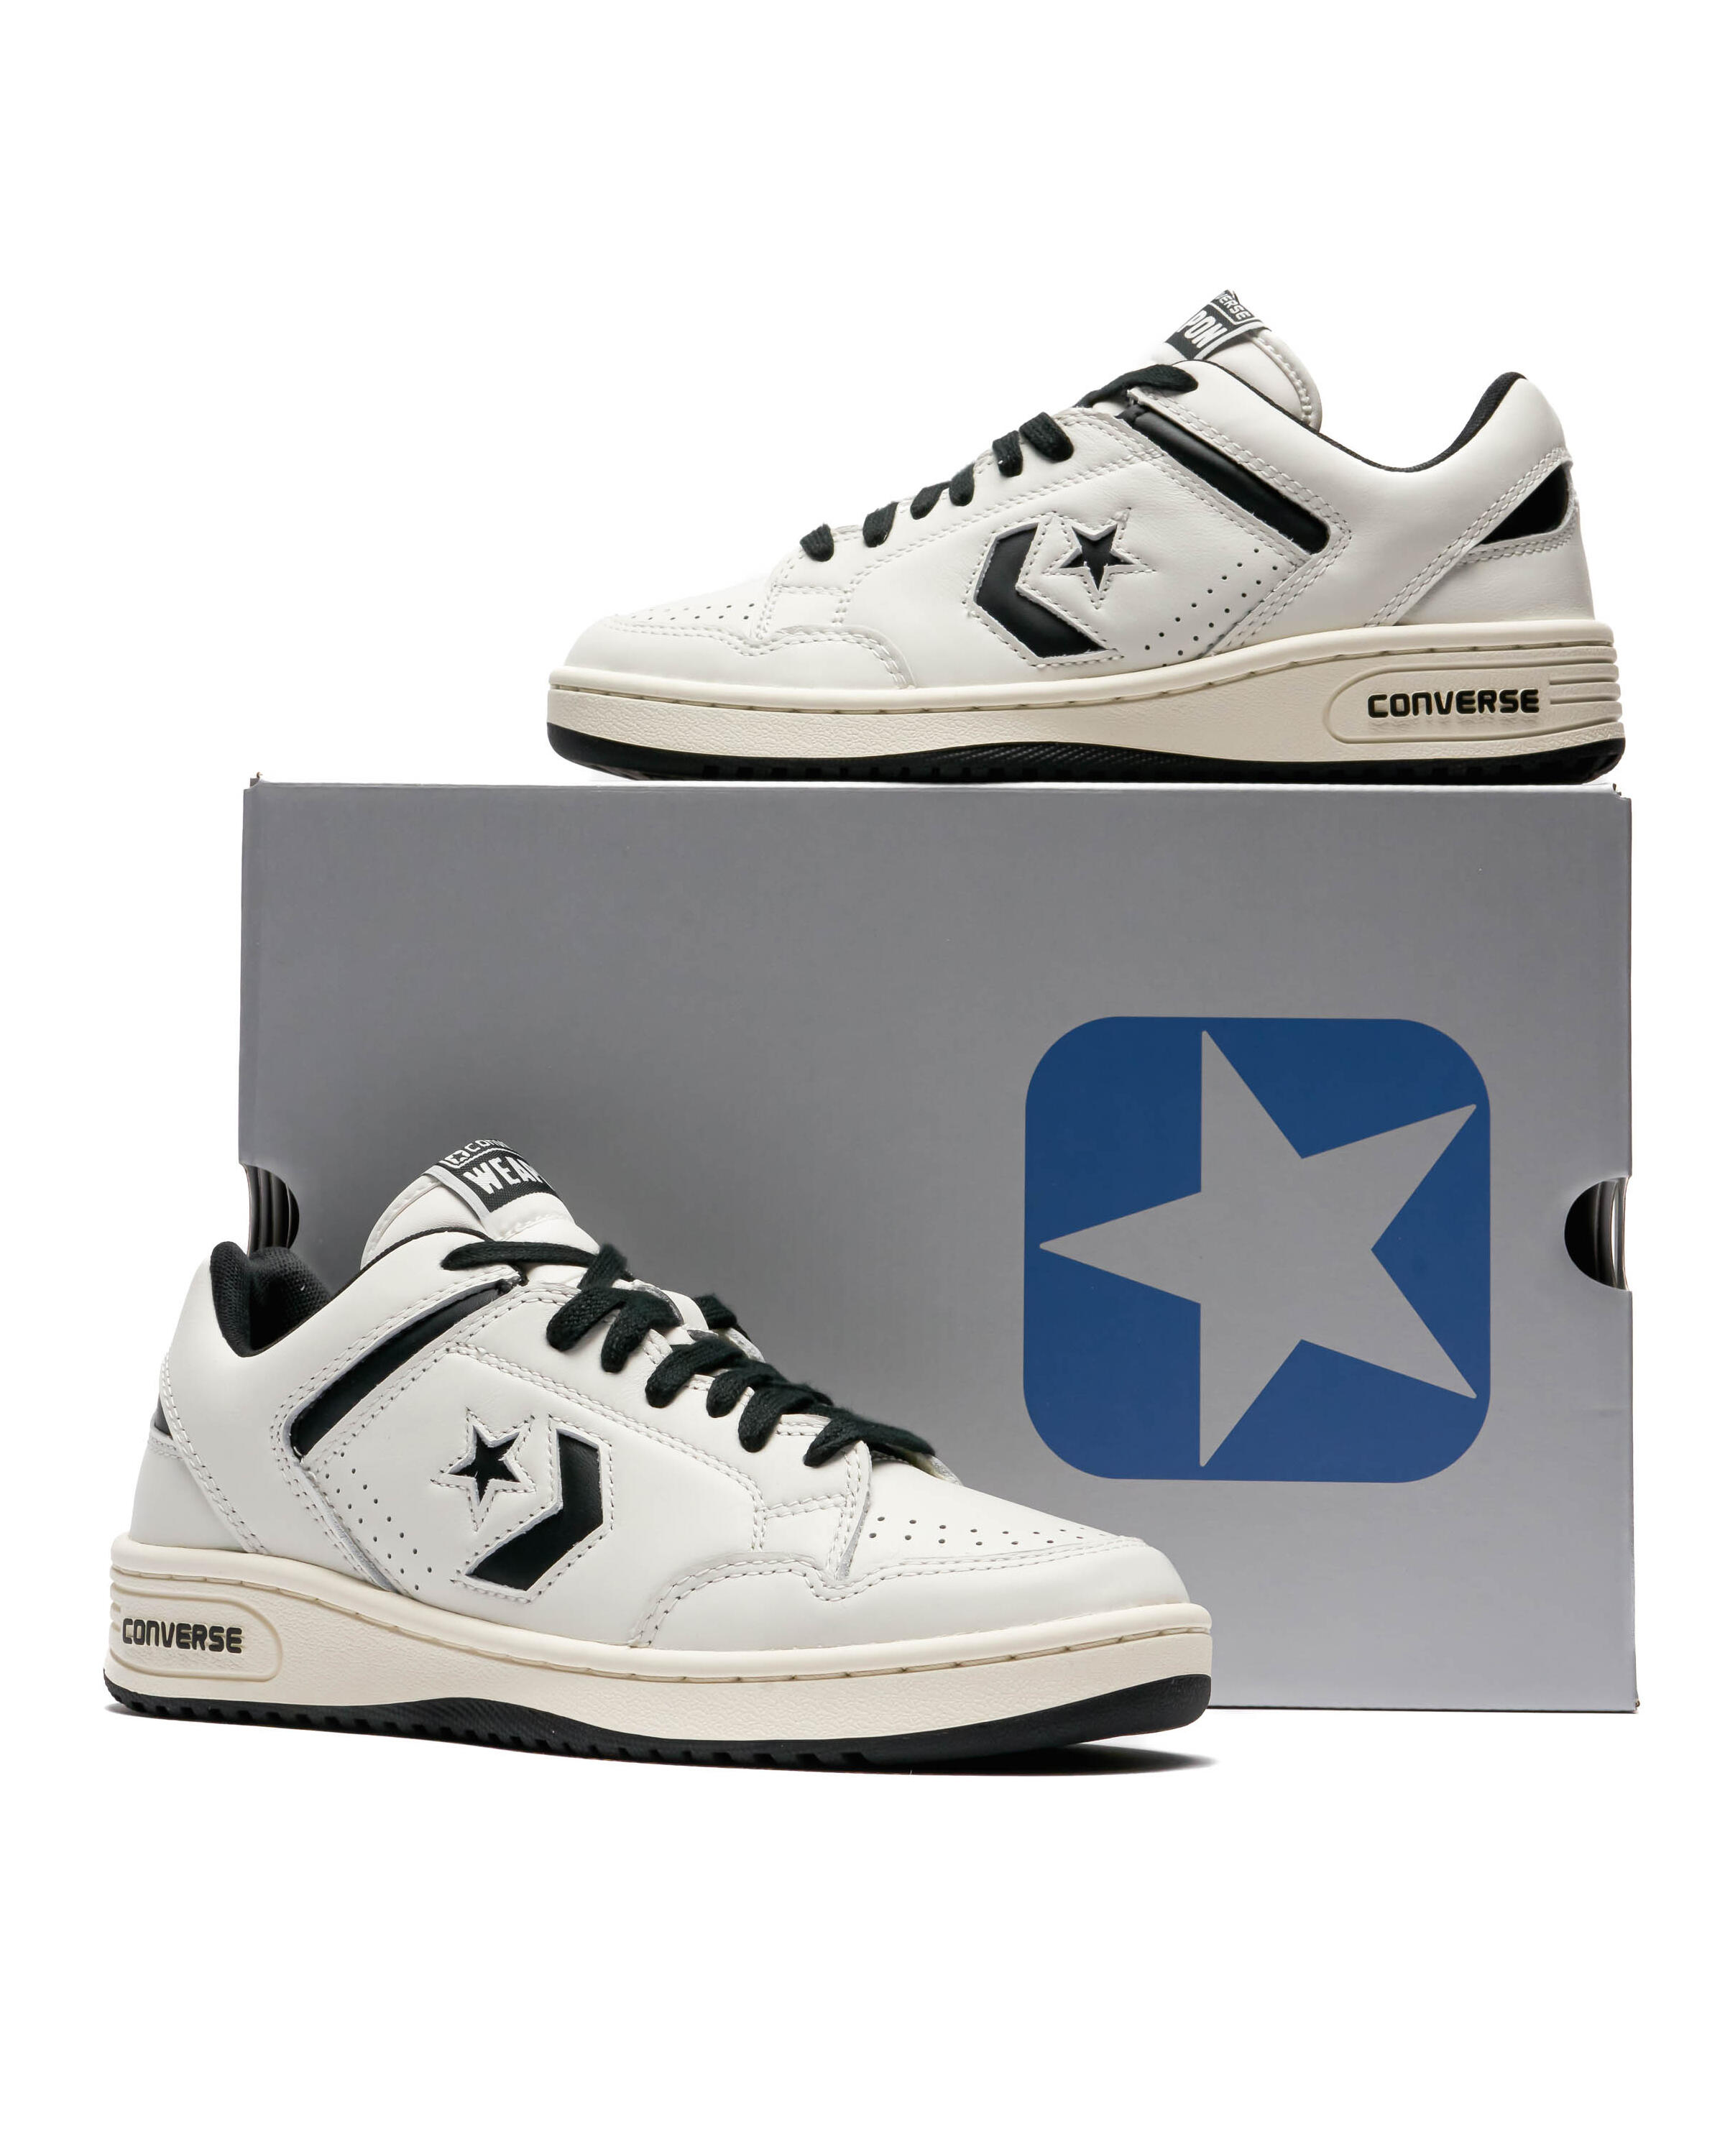 Converse x OLD MONEY WEAPON LOW OX